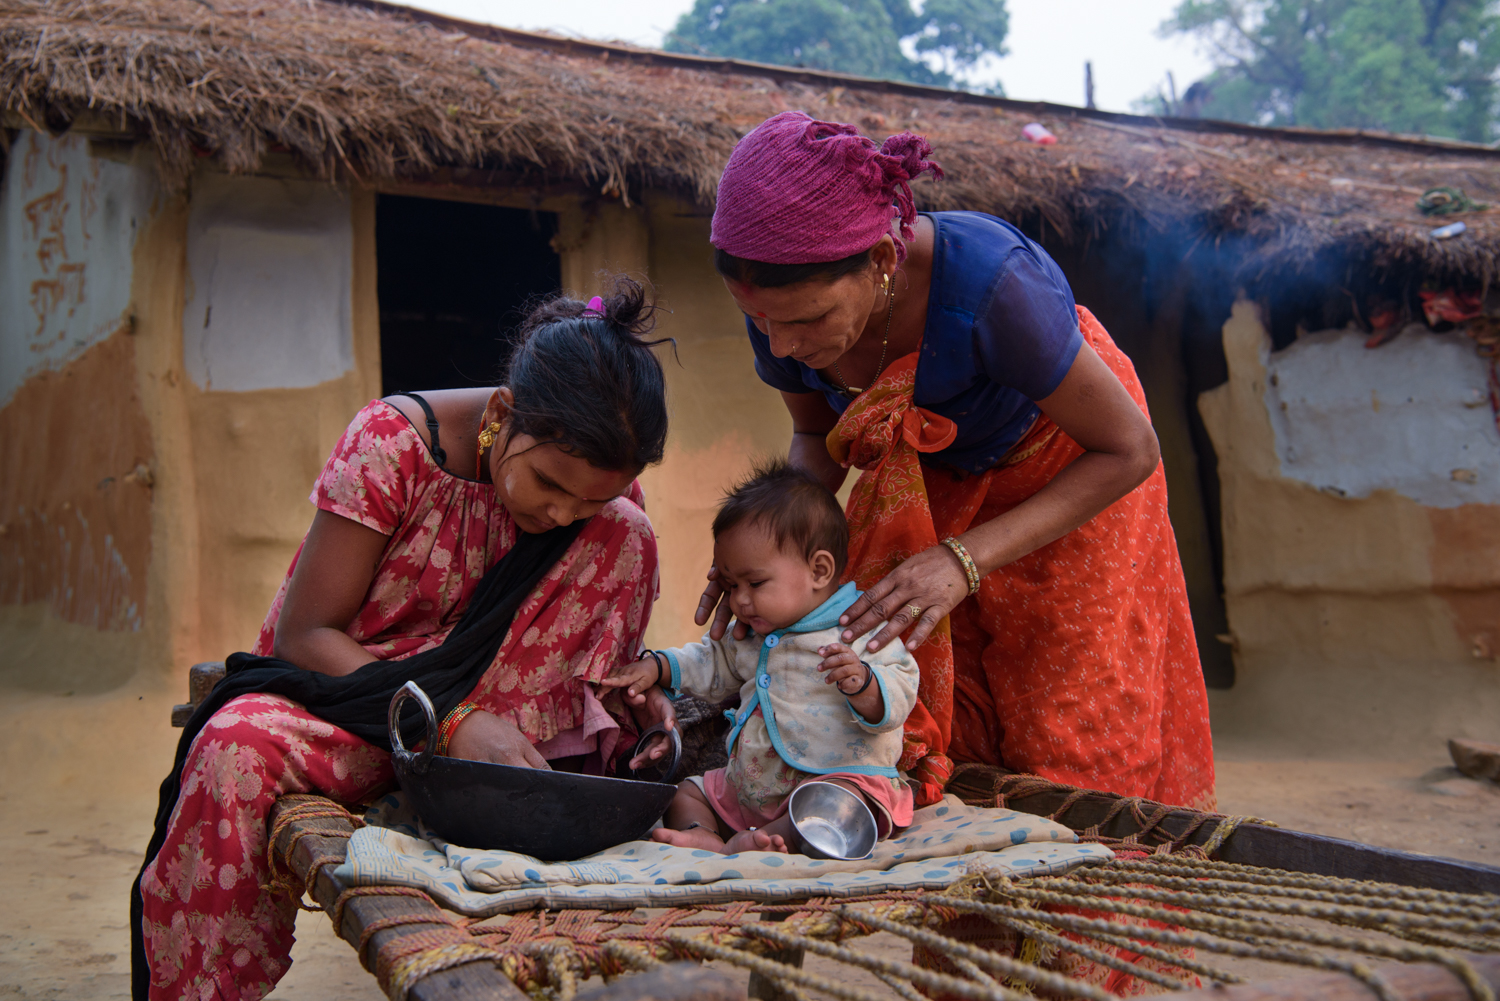  Lalita Badi (17) with her mother and seven month old daughter Ritu at their home in Majhi Shivir, Chaumala, Kailali, Nepal. Lalita had an arranged marriage at the age of 12 with an older man. She got pregnant soon and then lost her two babies one af